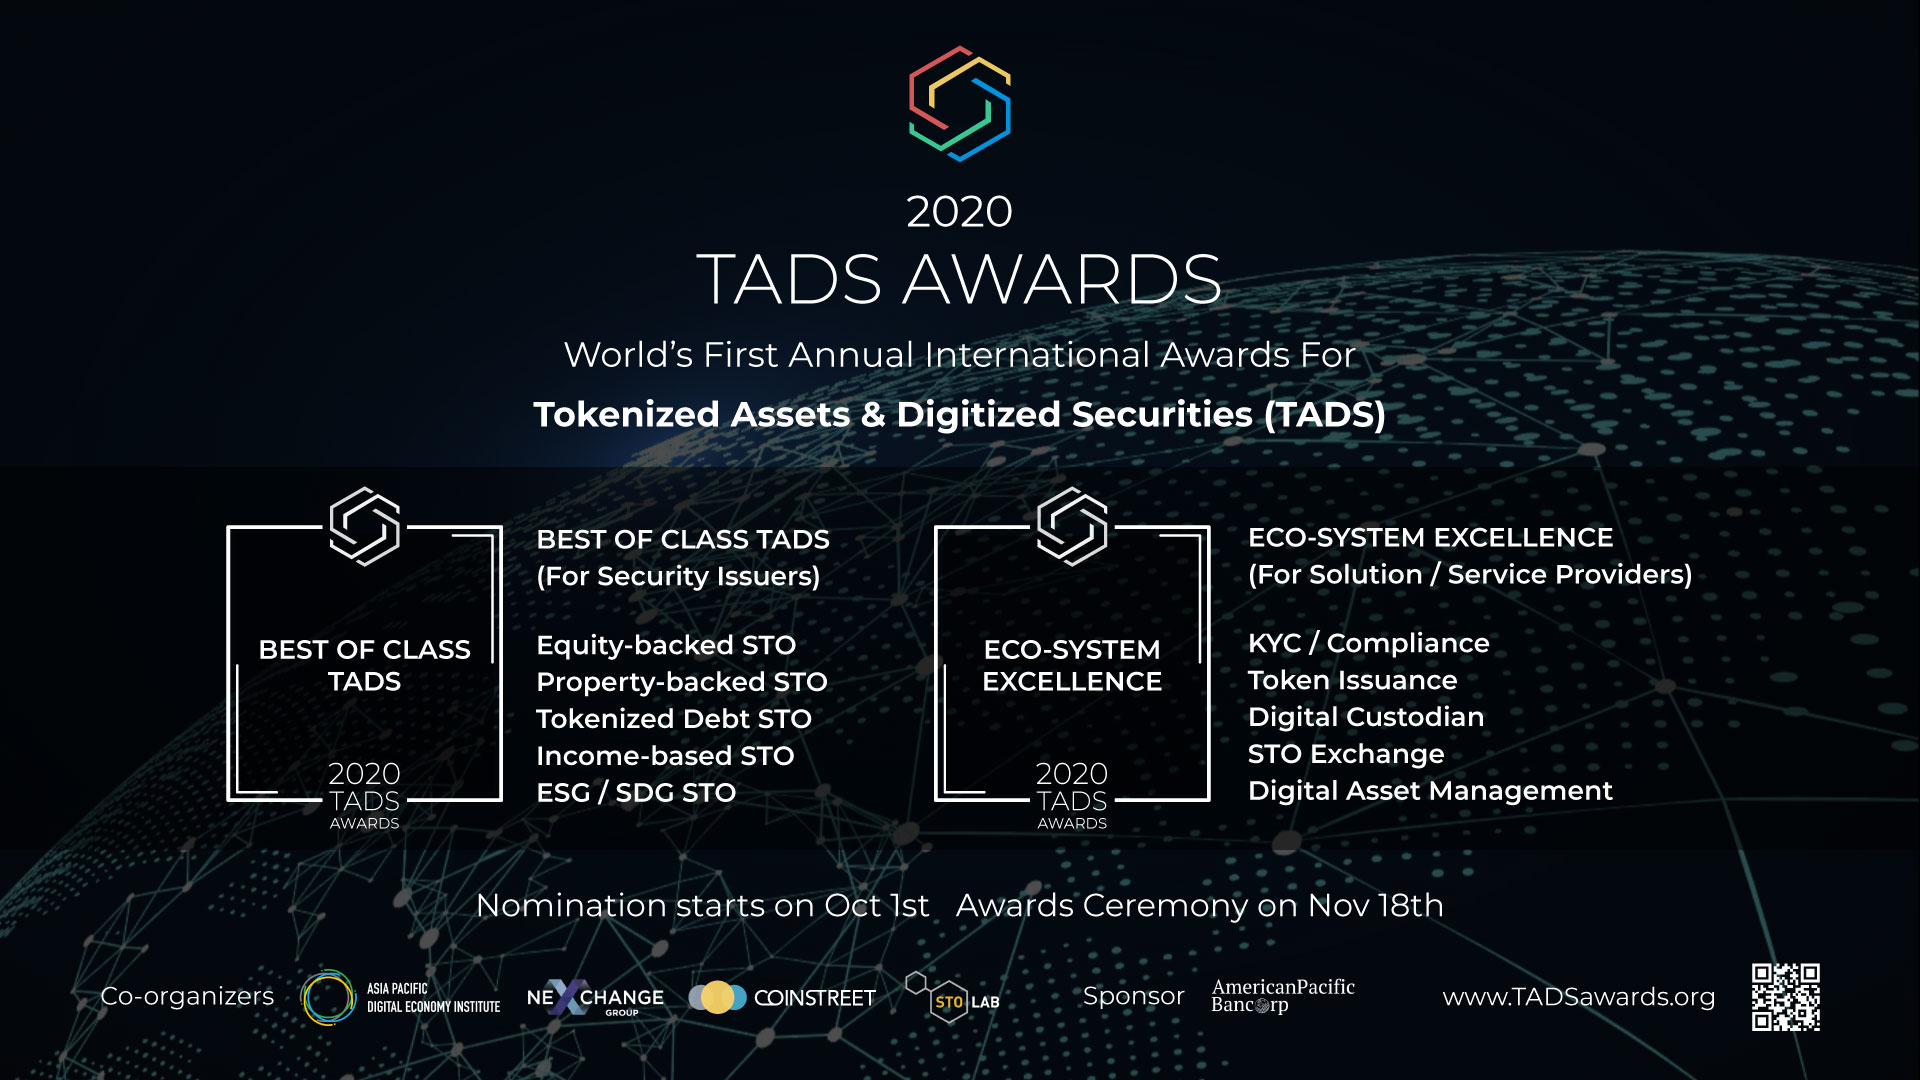 Article about TADS Awards The Worlds First Annual International Awards for Tokenized Assets & Digitized Securities Launched in Hong Kong 